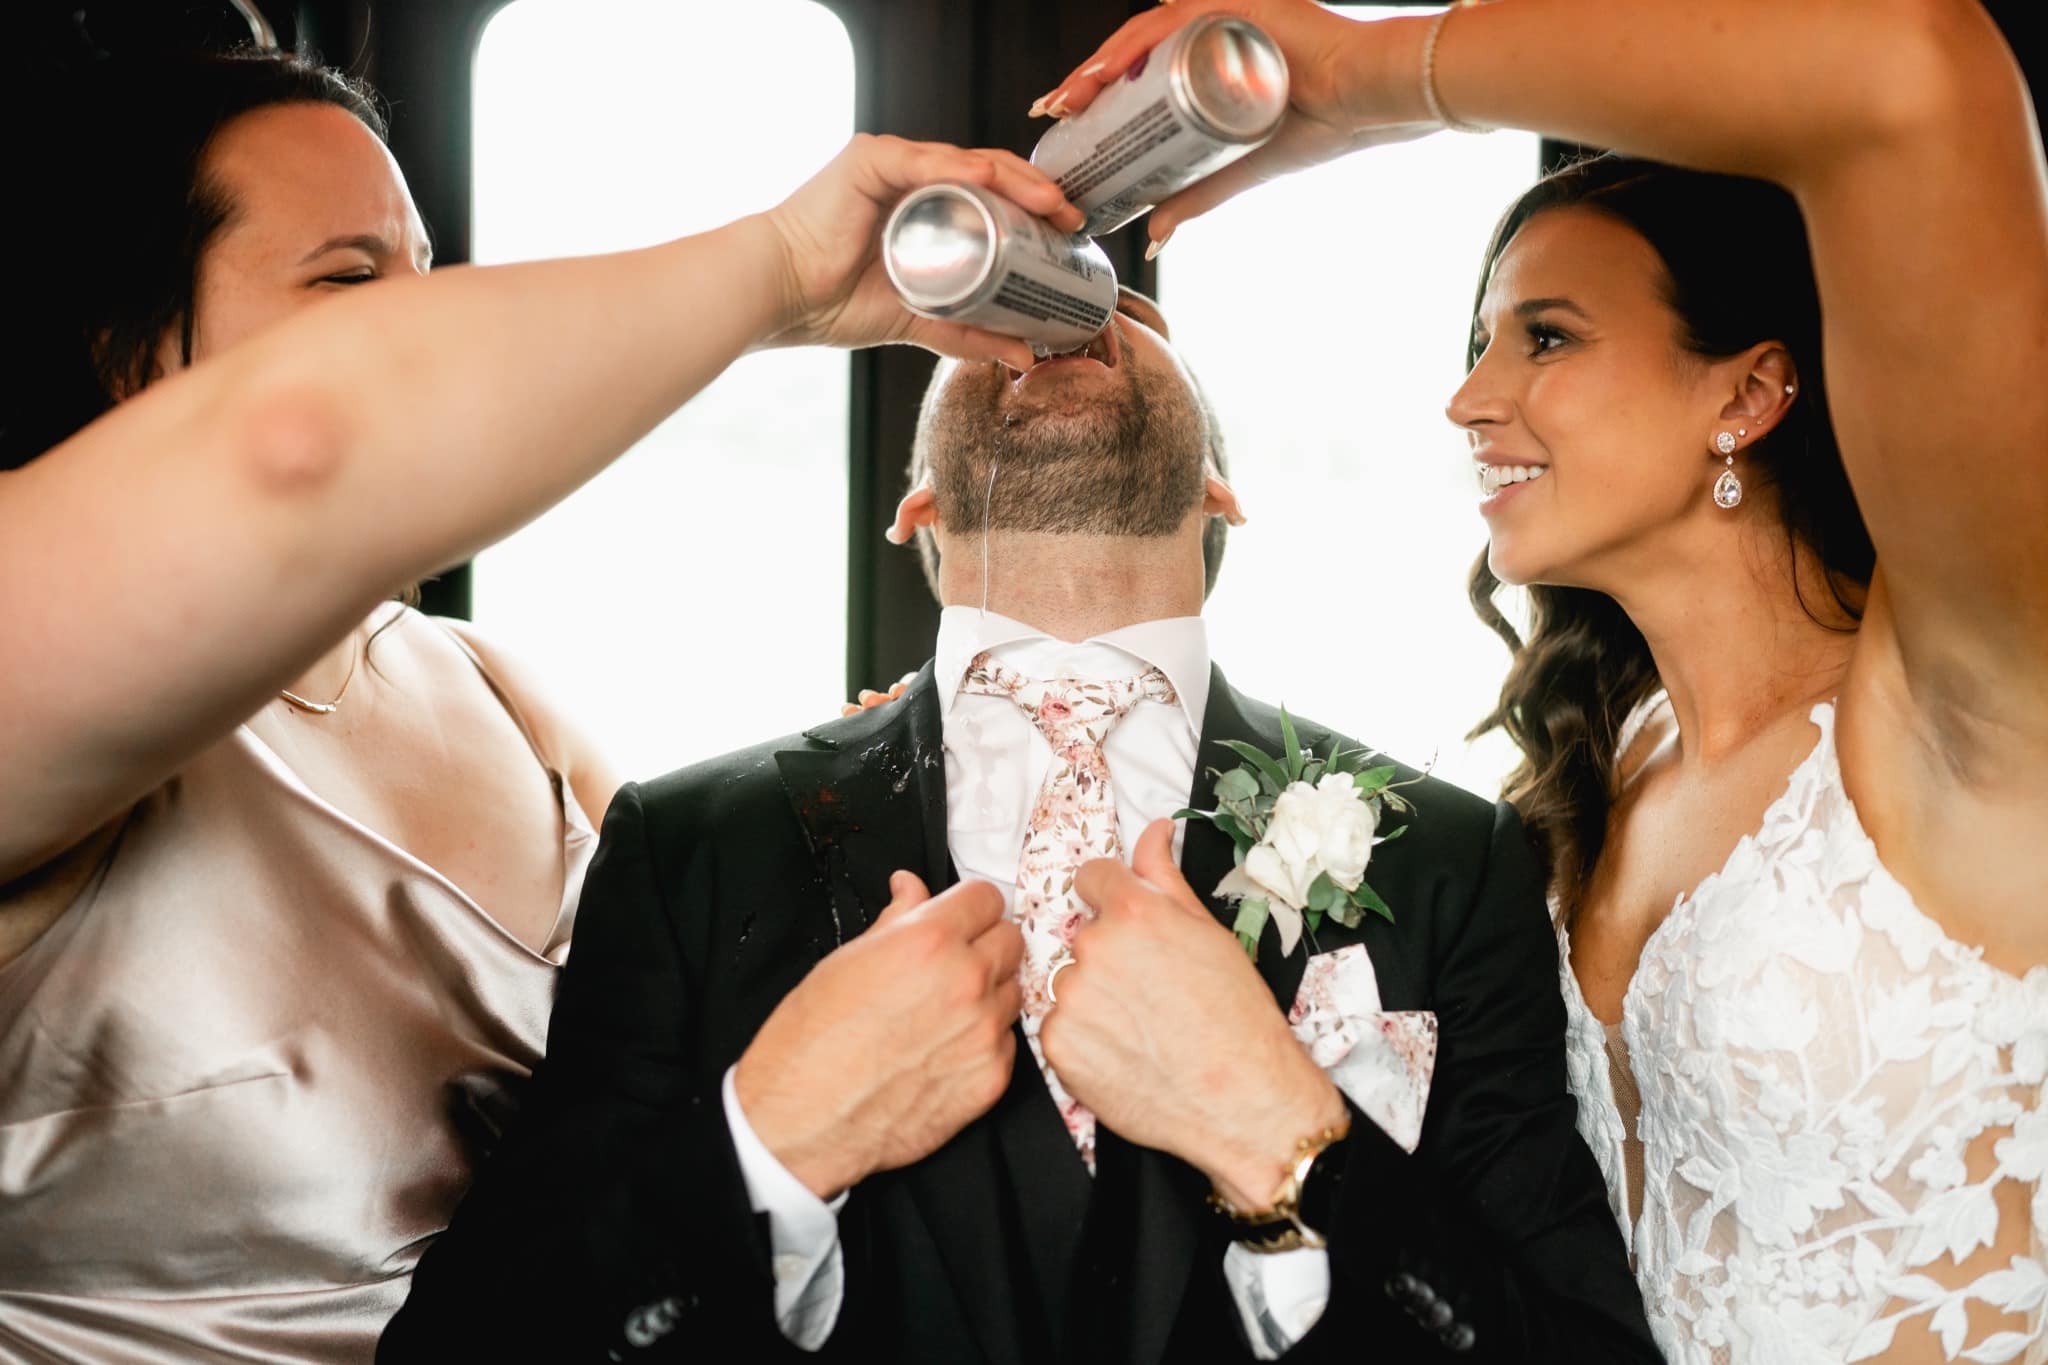 bride and bridesmaid pouring drink in groom’s mouth